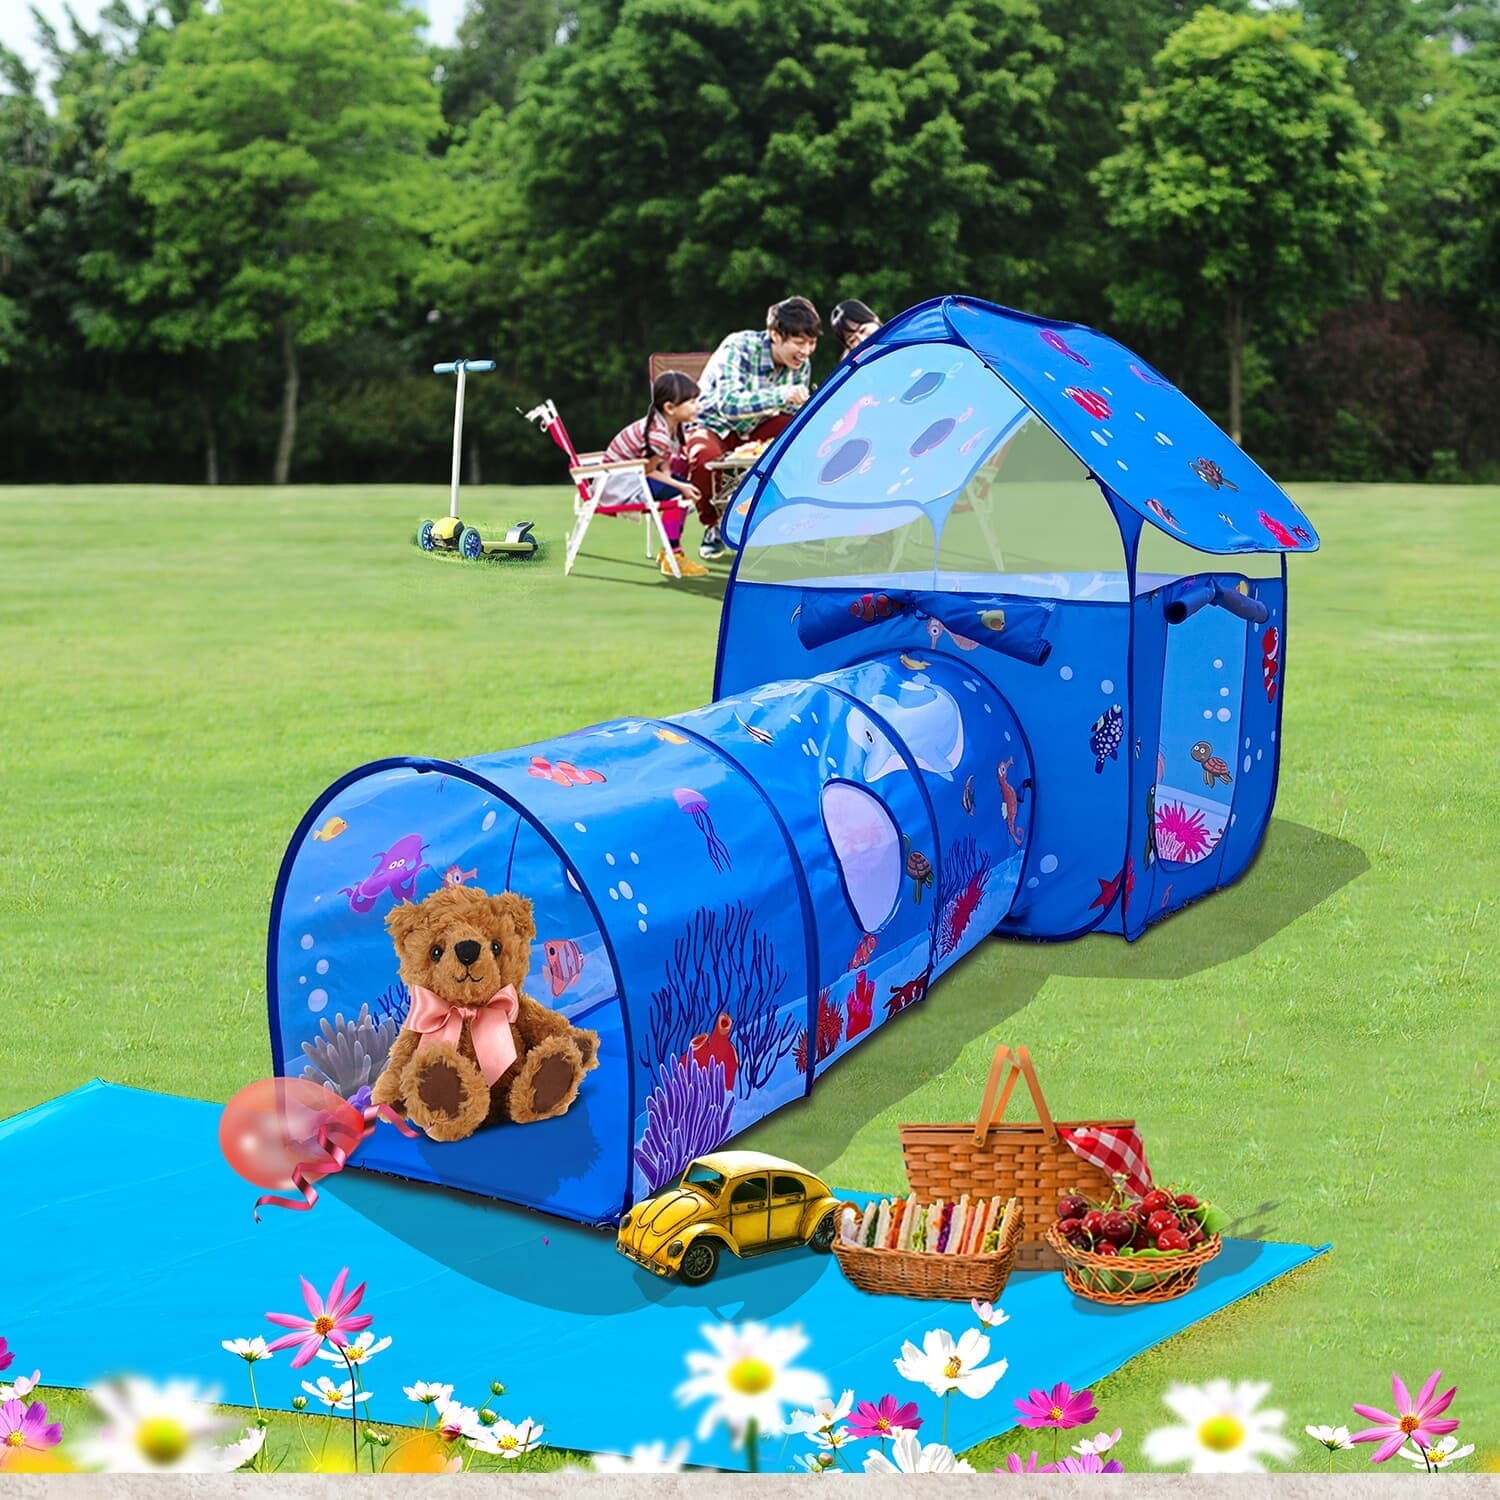 Homfu Play Tent for Kids Playhouse for Children Boys Popup Tent (Ocean Blue)  